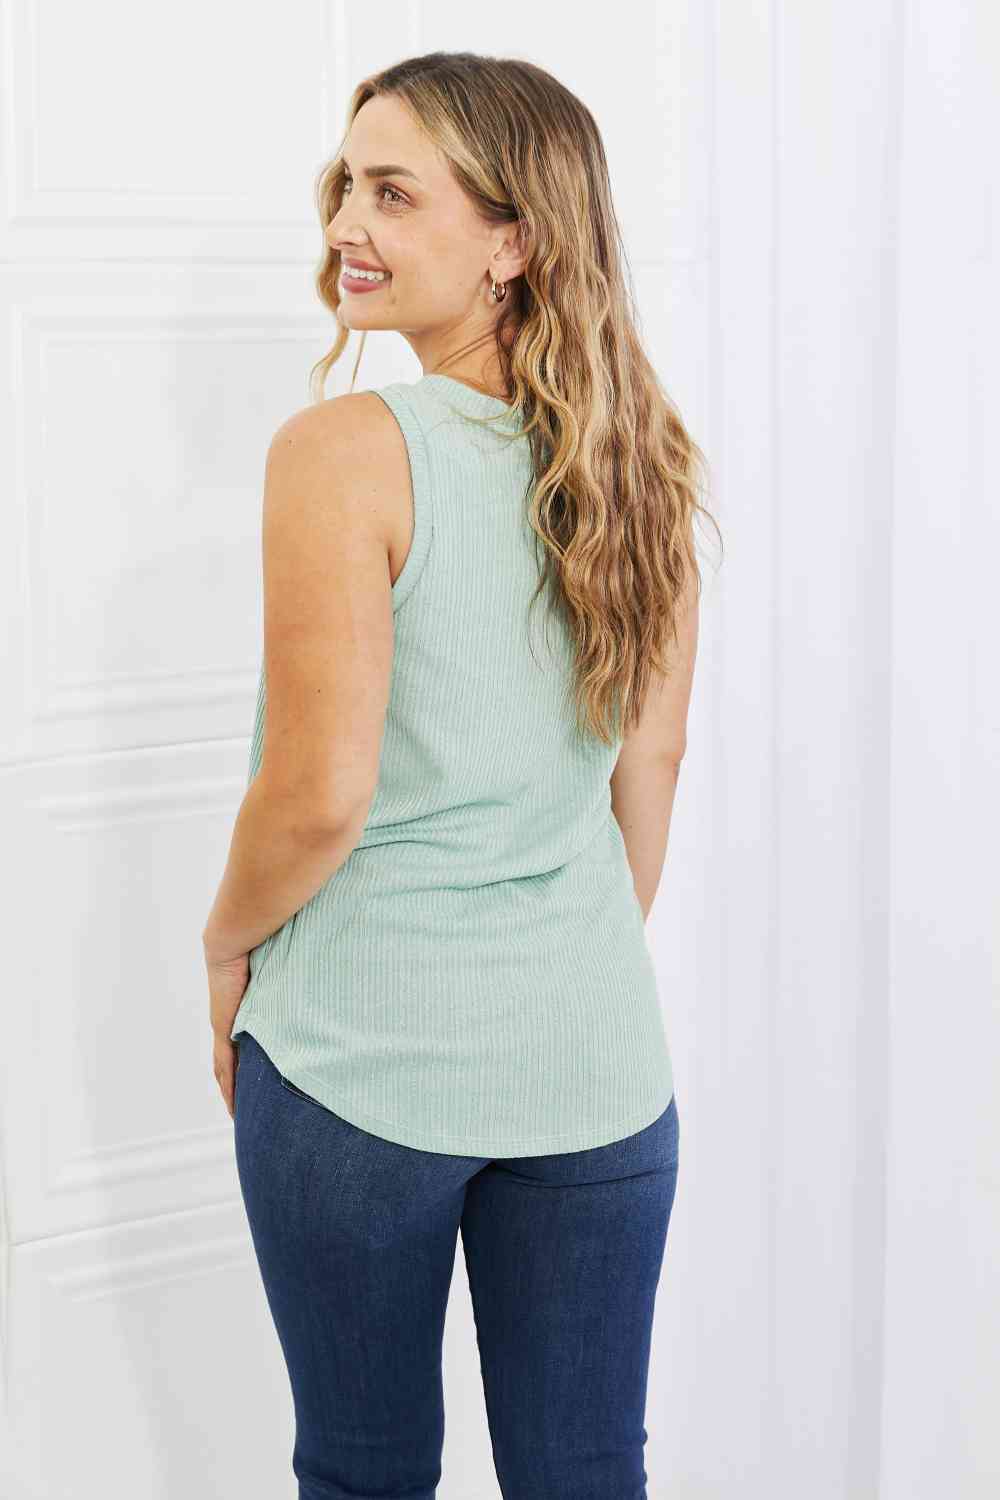 BOMBOM One Wish Ribbed Knit Top in Gum Leaf - Alonna's Legging Land